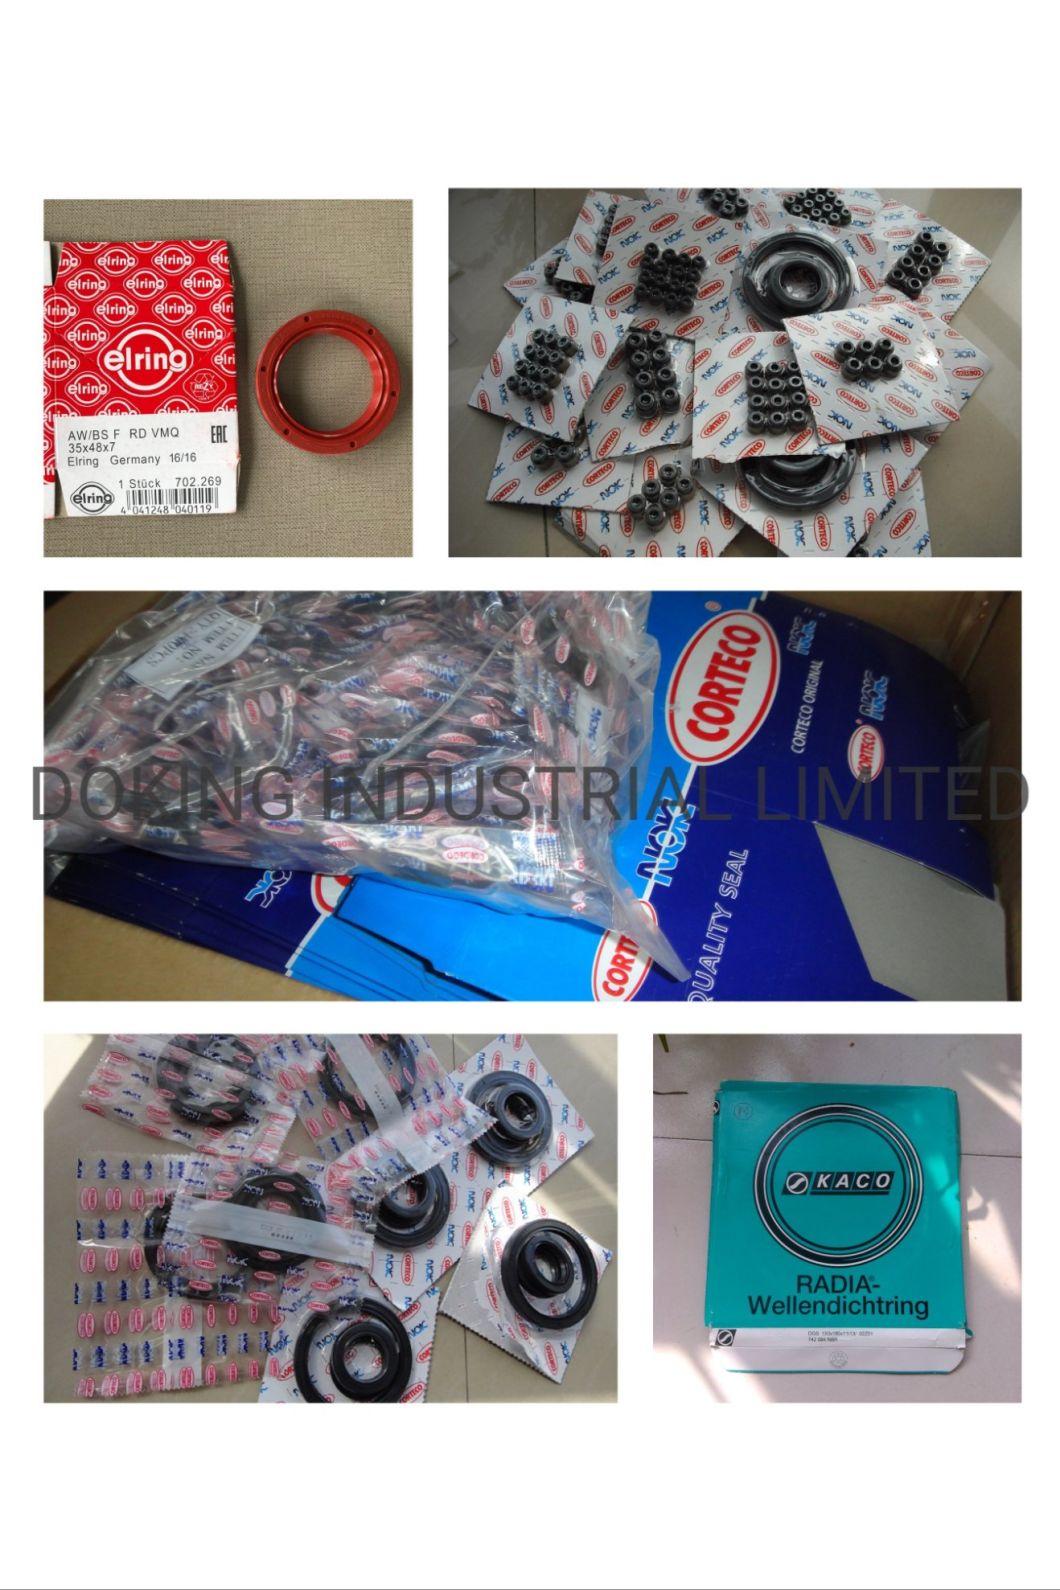 Silicone Rubber Valve Seal, O Ring, Motorcycle Gasket, Auto Parts, Rubber Oil Seal